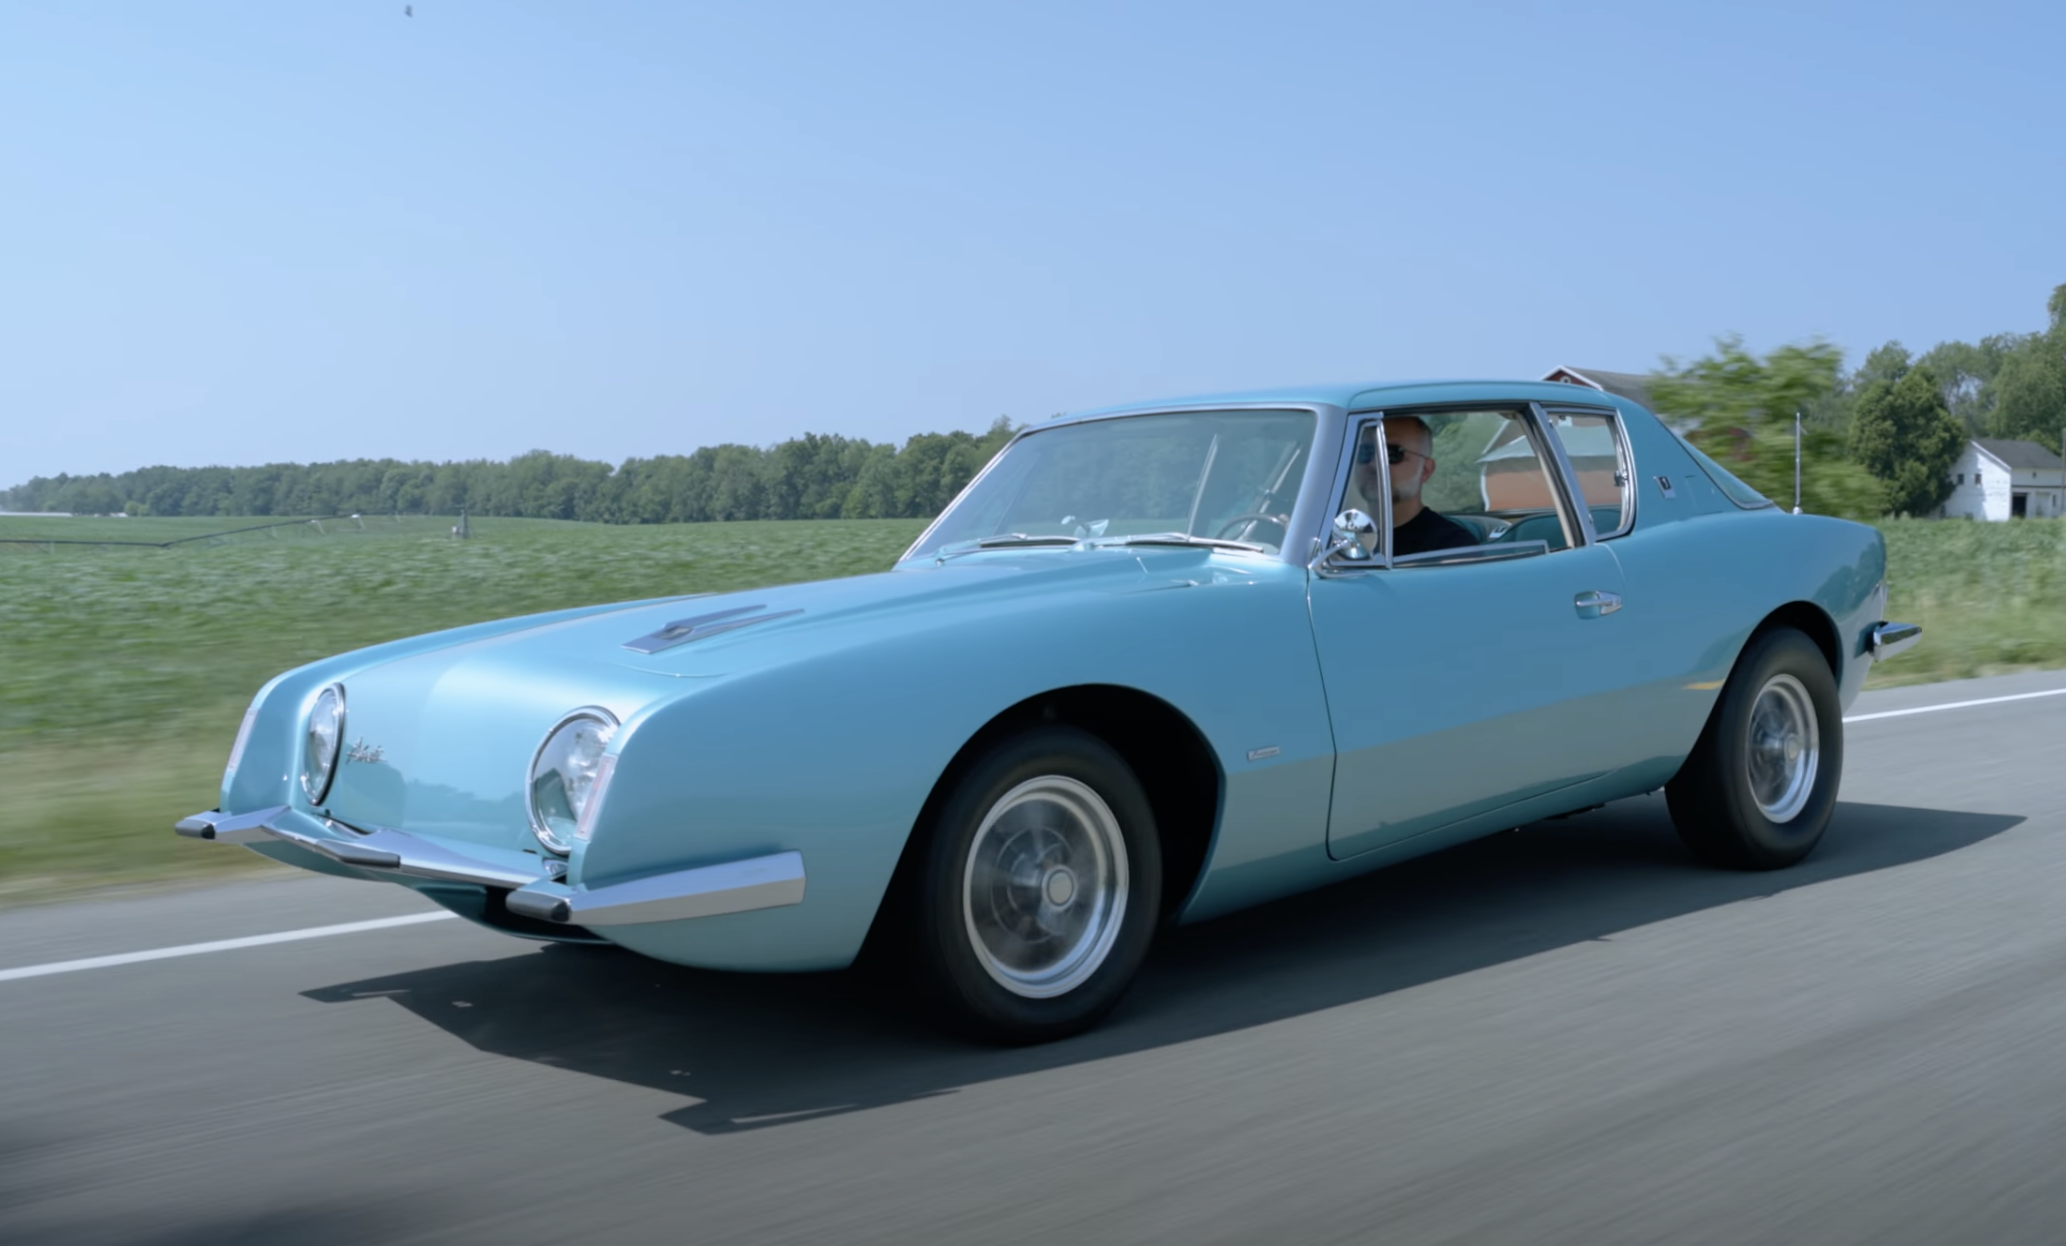 TESTED Muscle: Was the 1963 Studebaker Avanti R2 the First American Muscle Car Ever Produced?